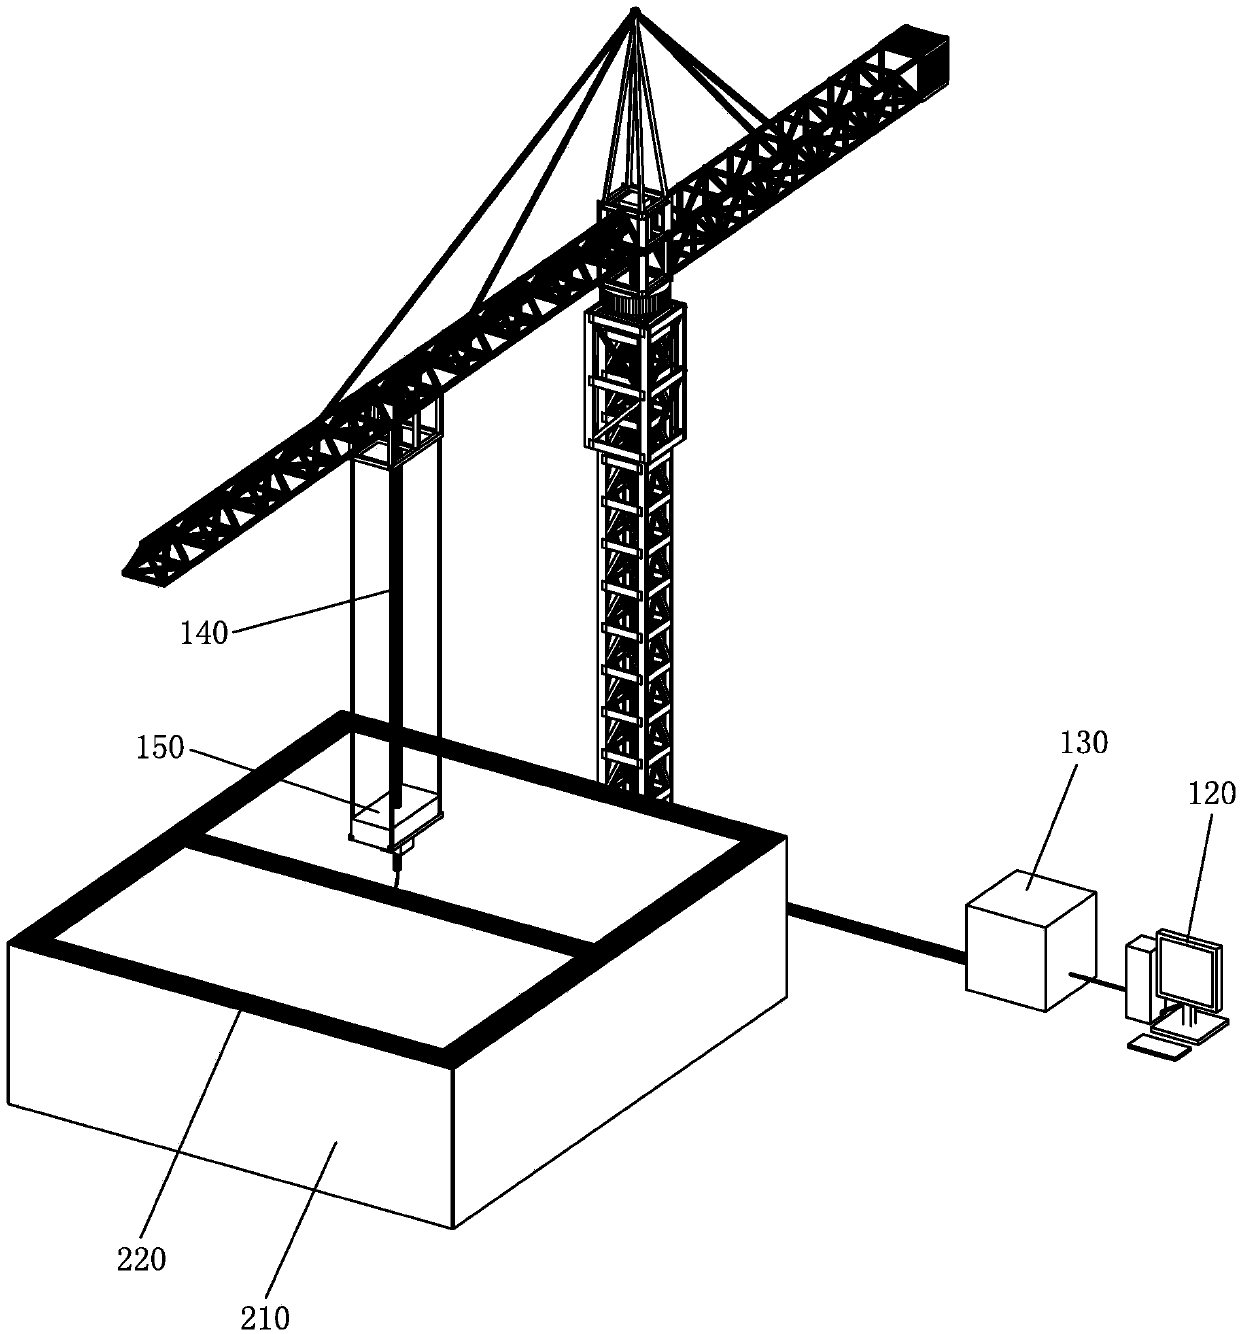 Construction equipment and construction method for constructional engineering